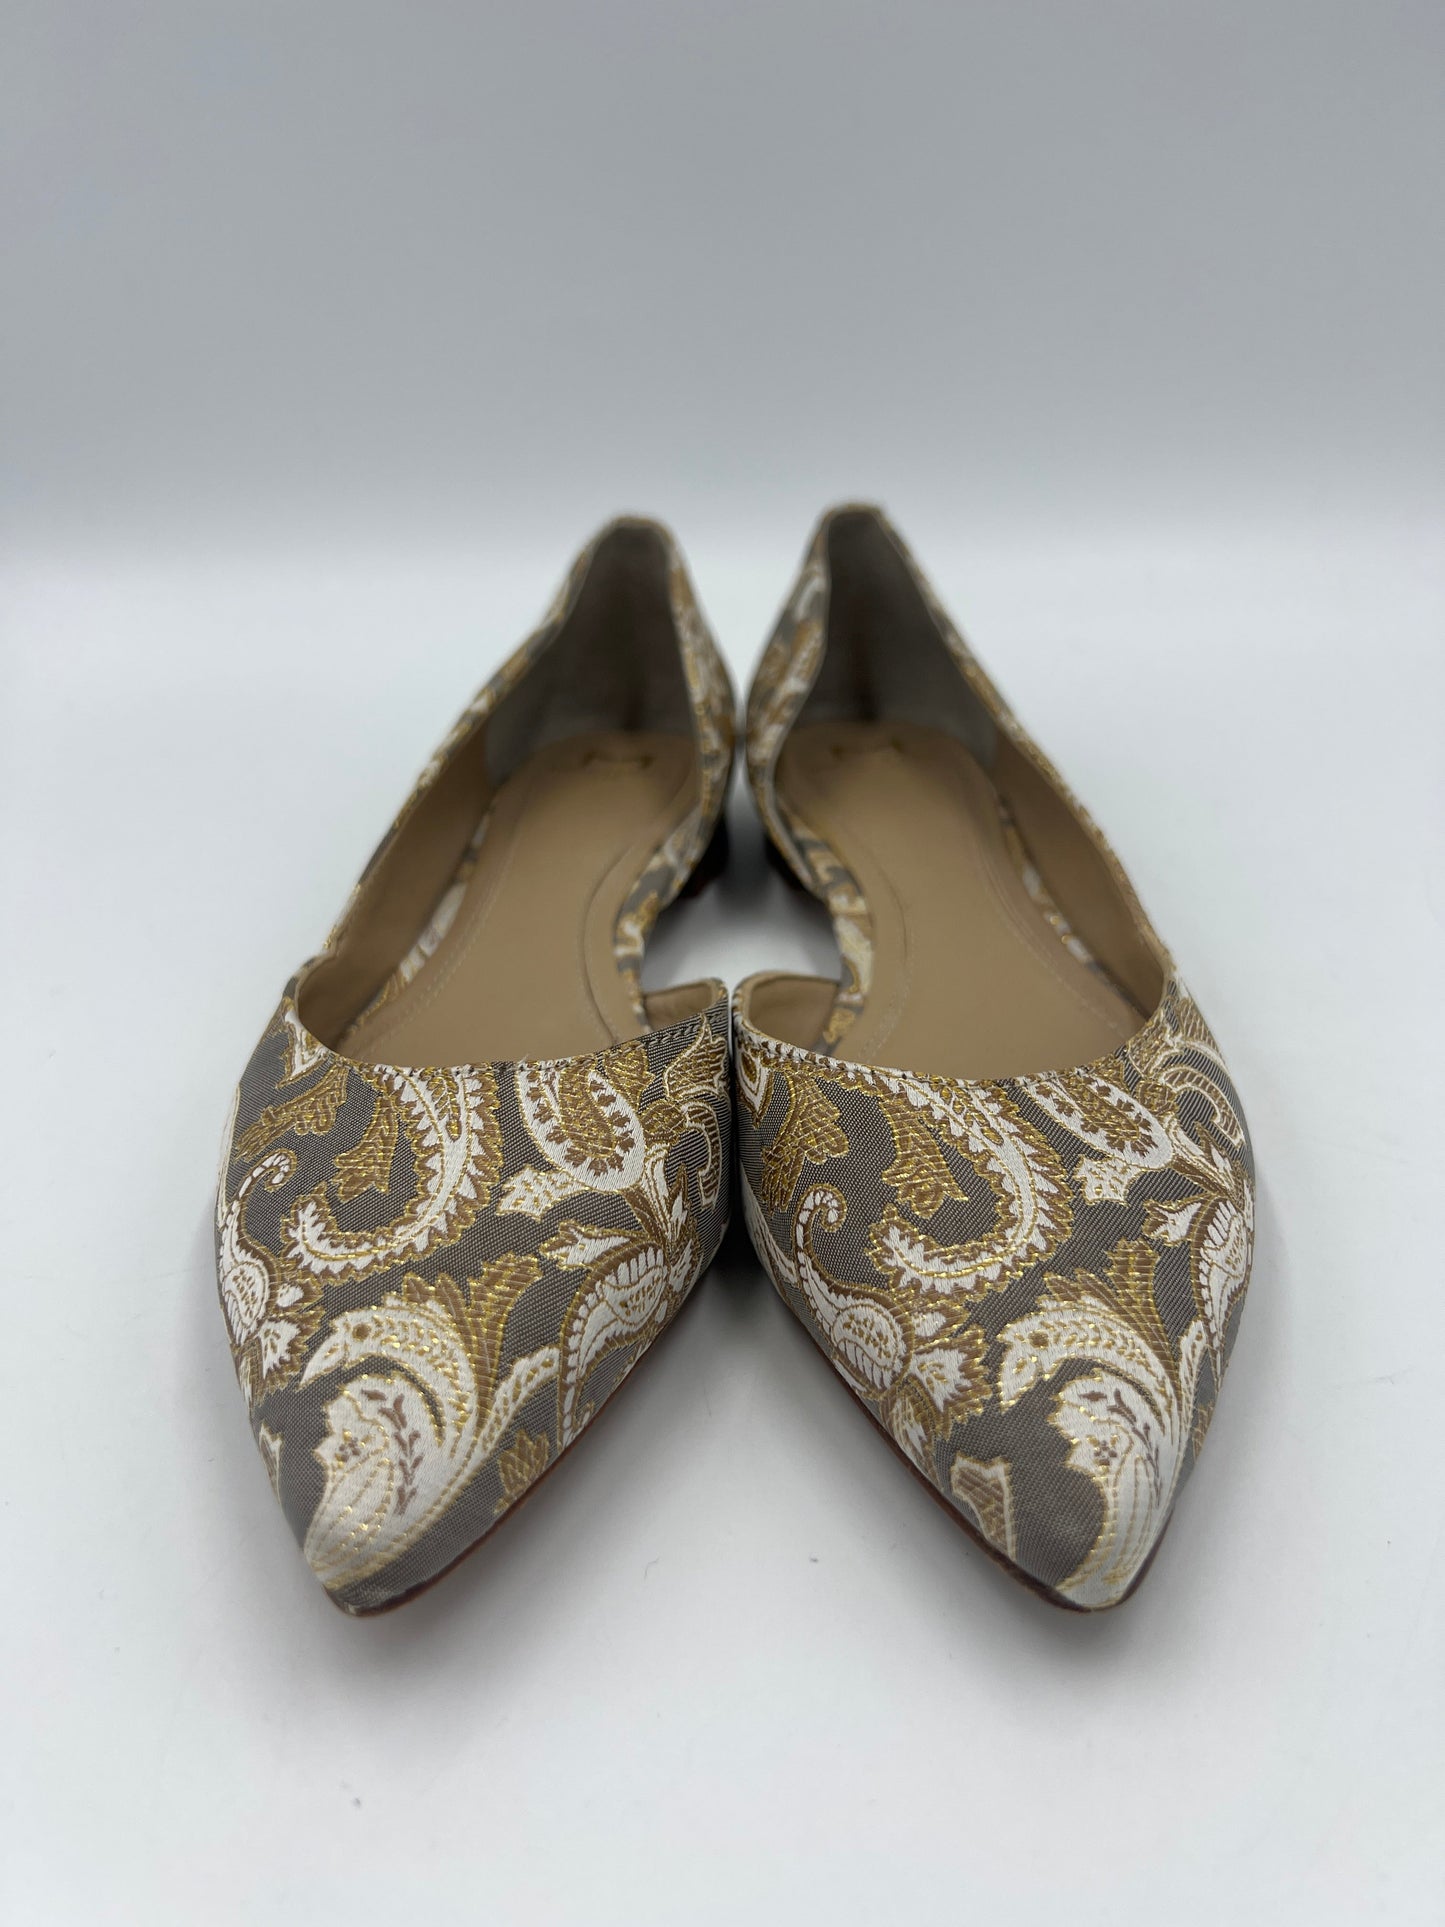 Shoes Flats Ballet By Marc Fisher  Size: 6.5